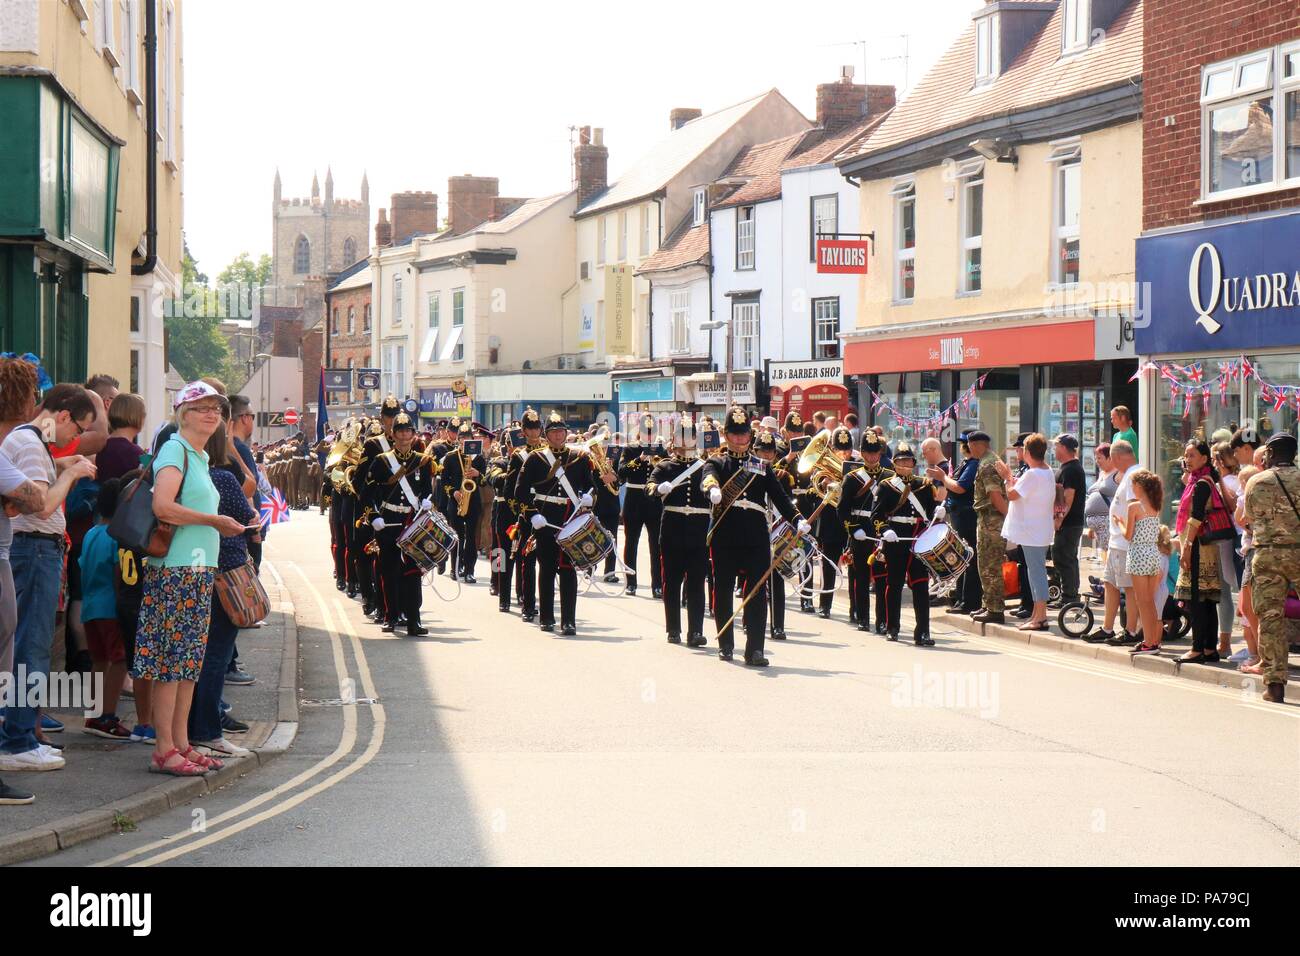 Bicester, Oxfordshire, UK 21.07.2018 - 1 Regiment RLC granted The Freedom of Entry into Bicester, the highest civic honour that can be bestowed on a military unit.  The Regiment exercised their 'freedom' to march through the town to the Market Square, with swords drawn, bayonets fixed, drums beating, bands playing and colours flying. Credit: Michelle Bridges/Alamy Live News Stock Photo